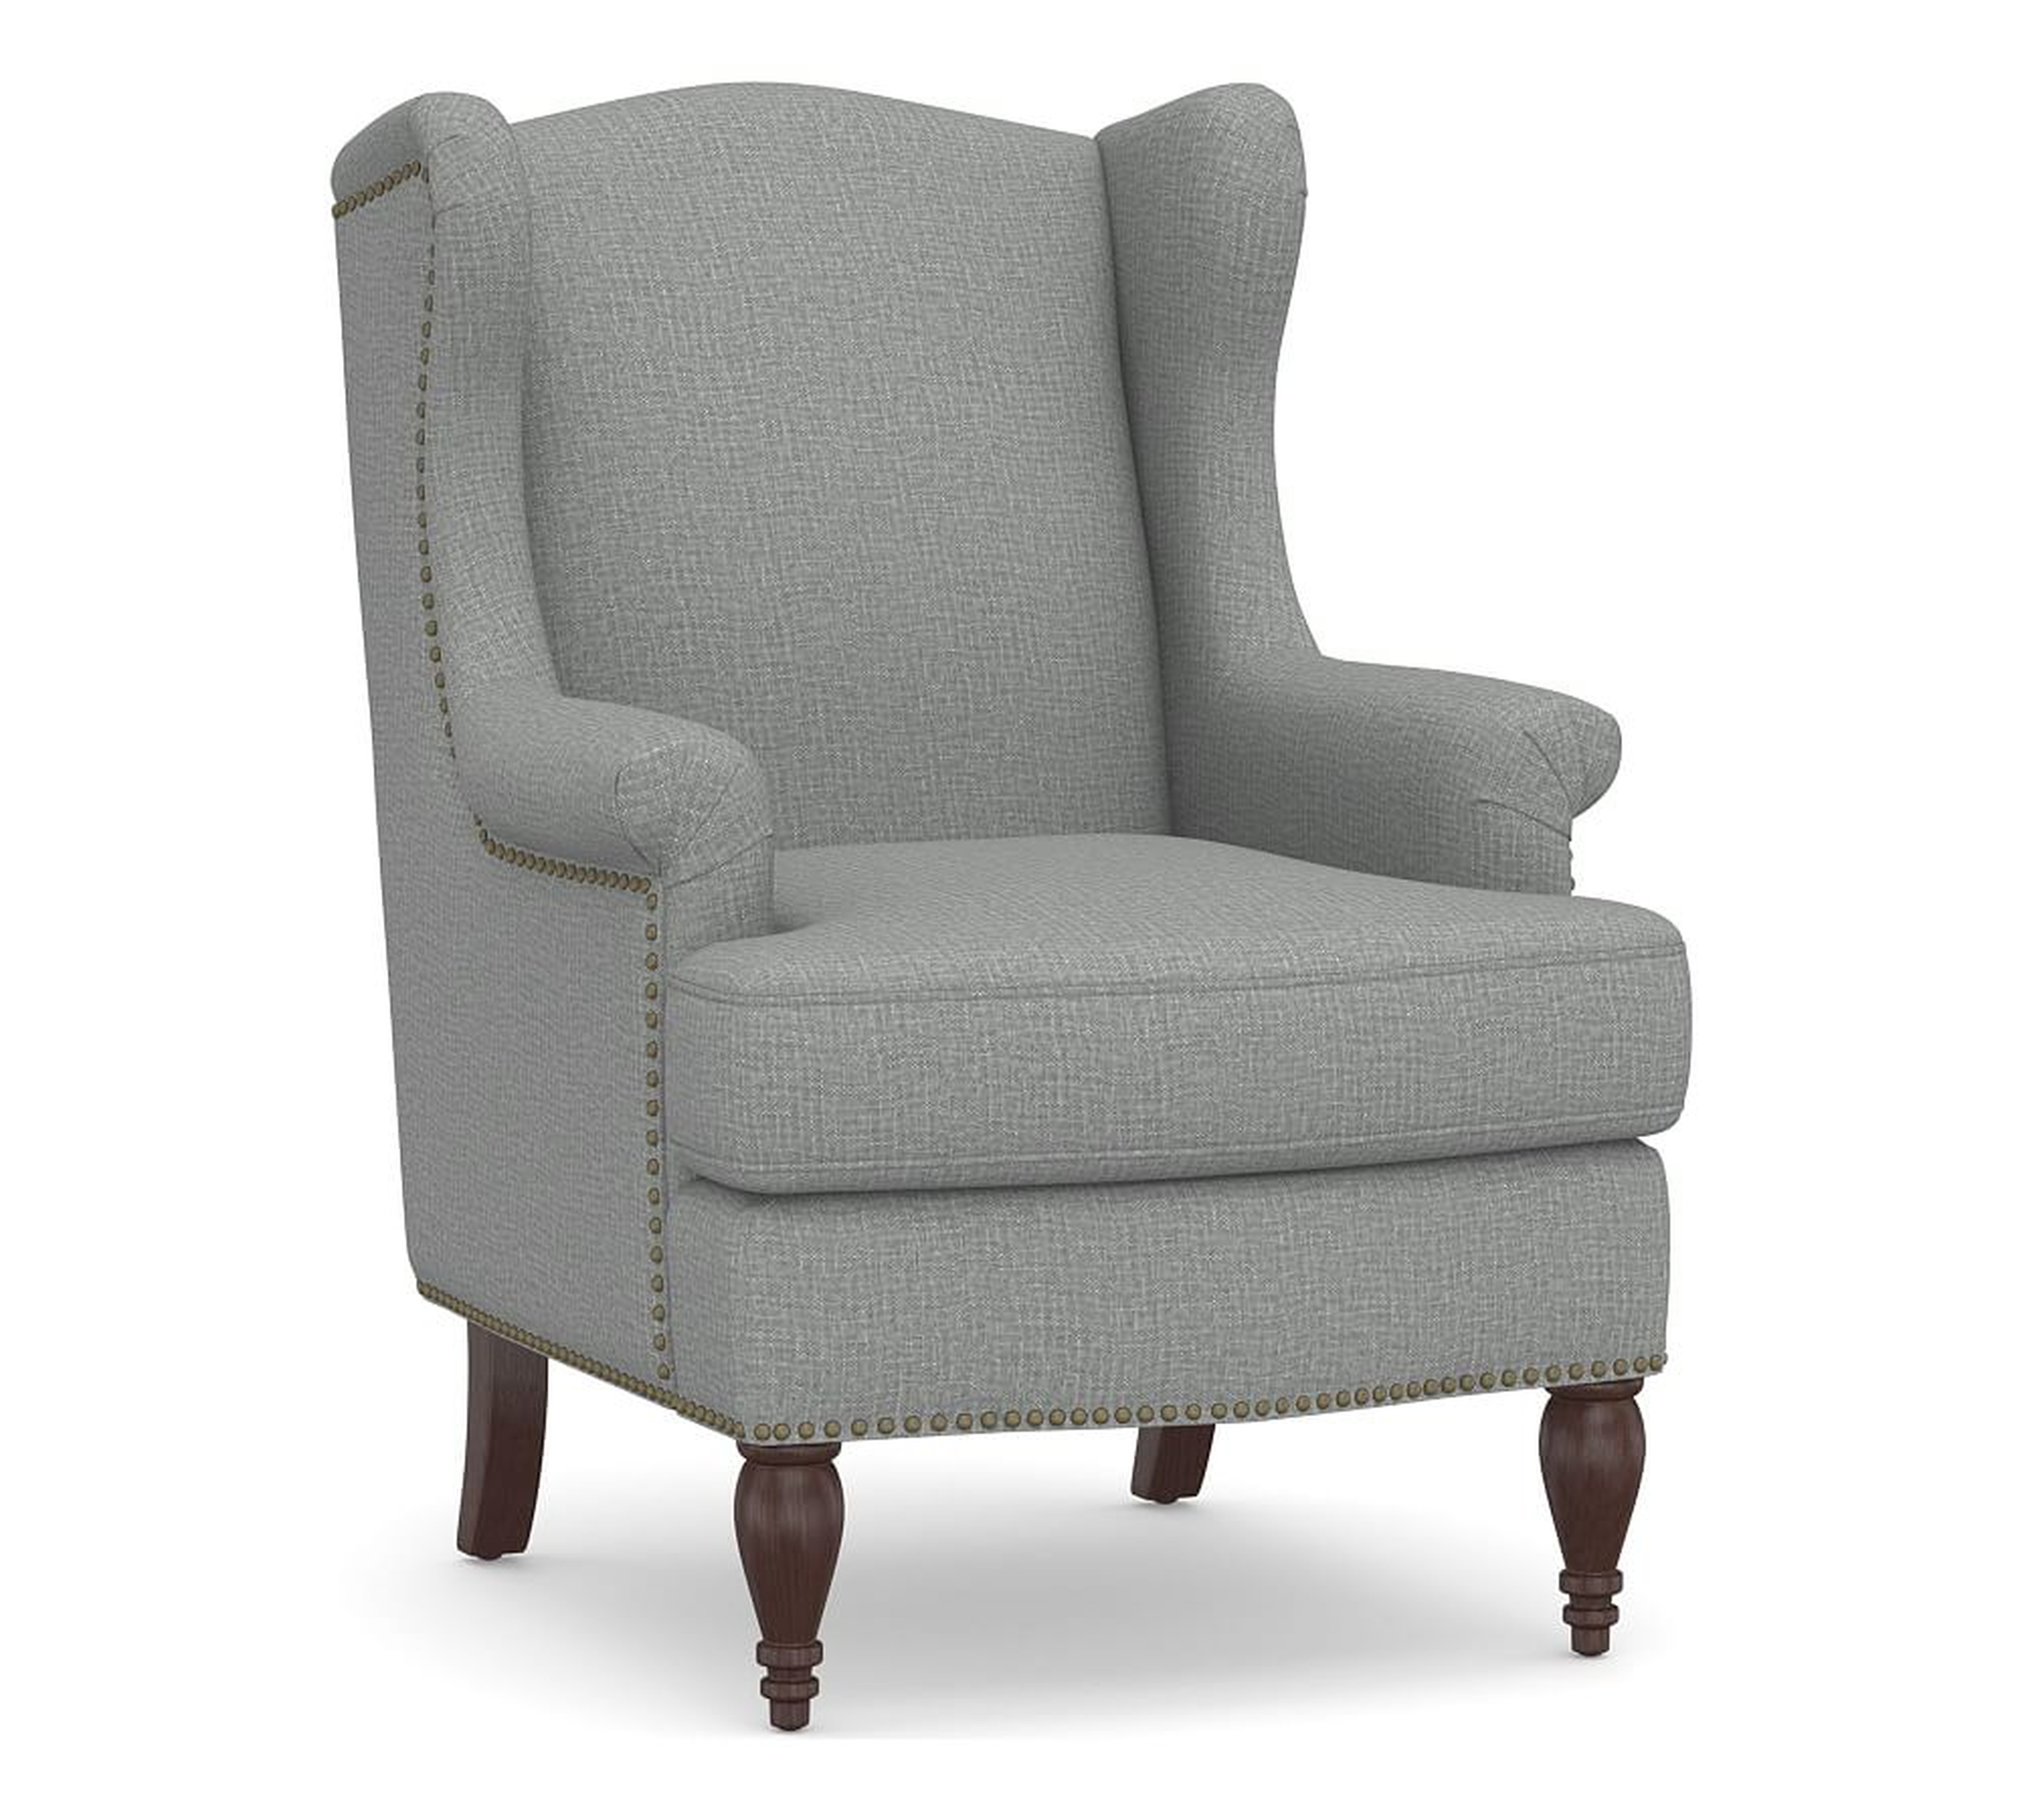 SoMa Delancey Upholstered Wingback Armchair, Polyester Wrapped Cushions, Performance Brushed Basketweave Chambray - Pottery Barn